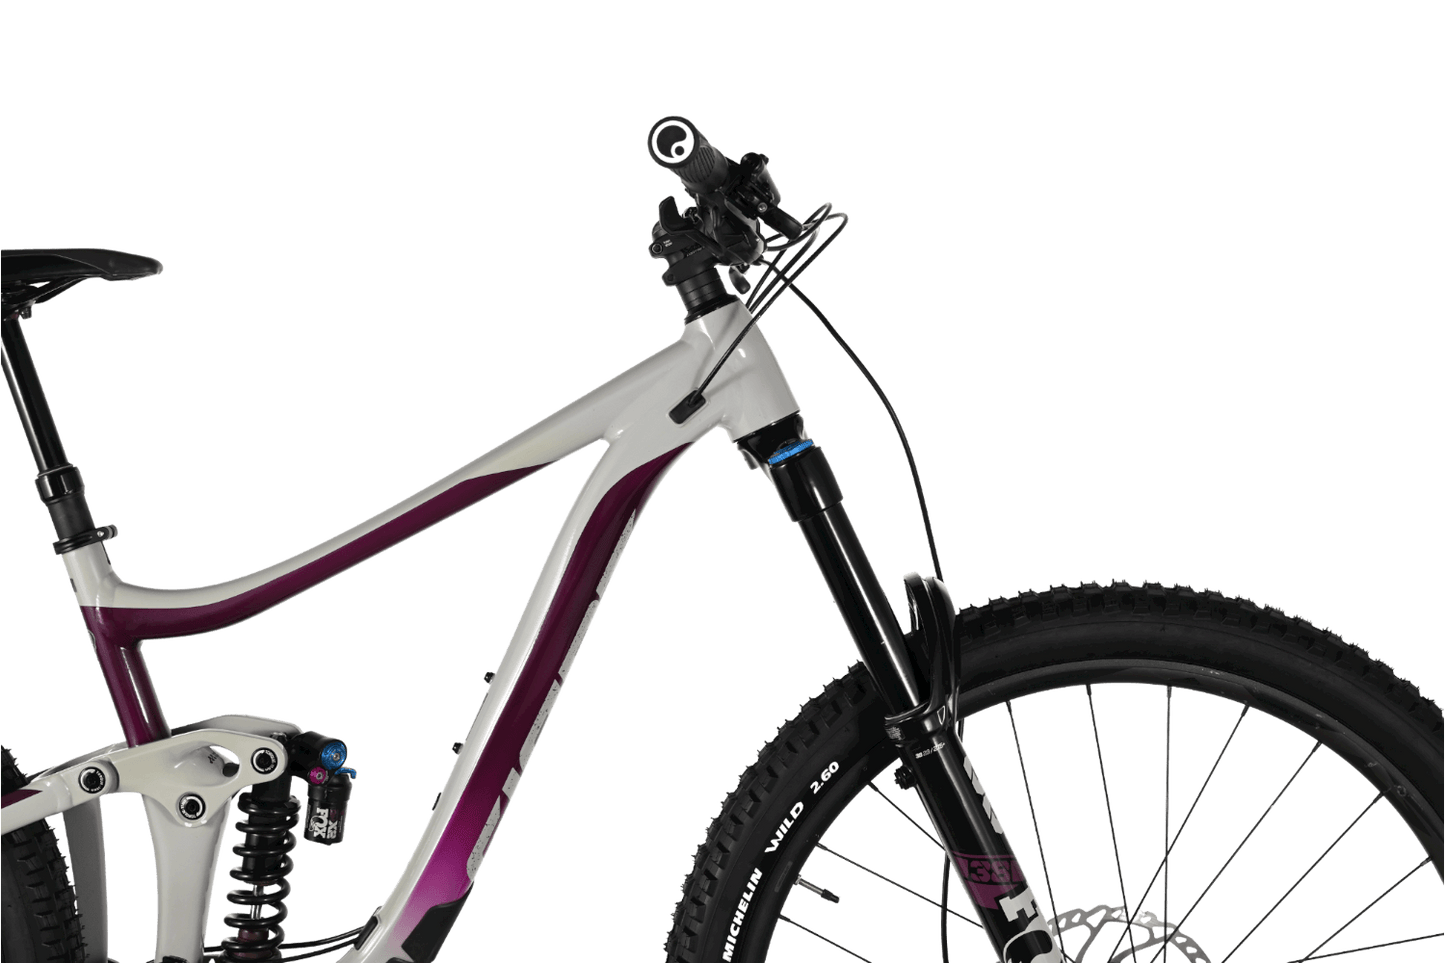 Giant Reign 29 SX | 2021 - M - Loop Sports